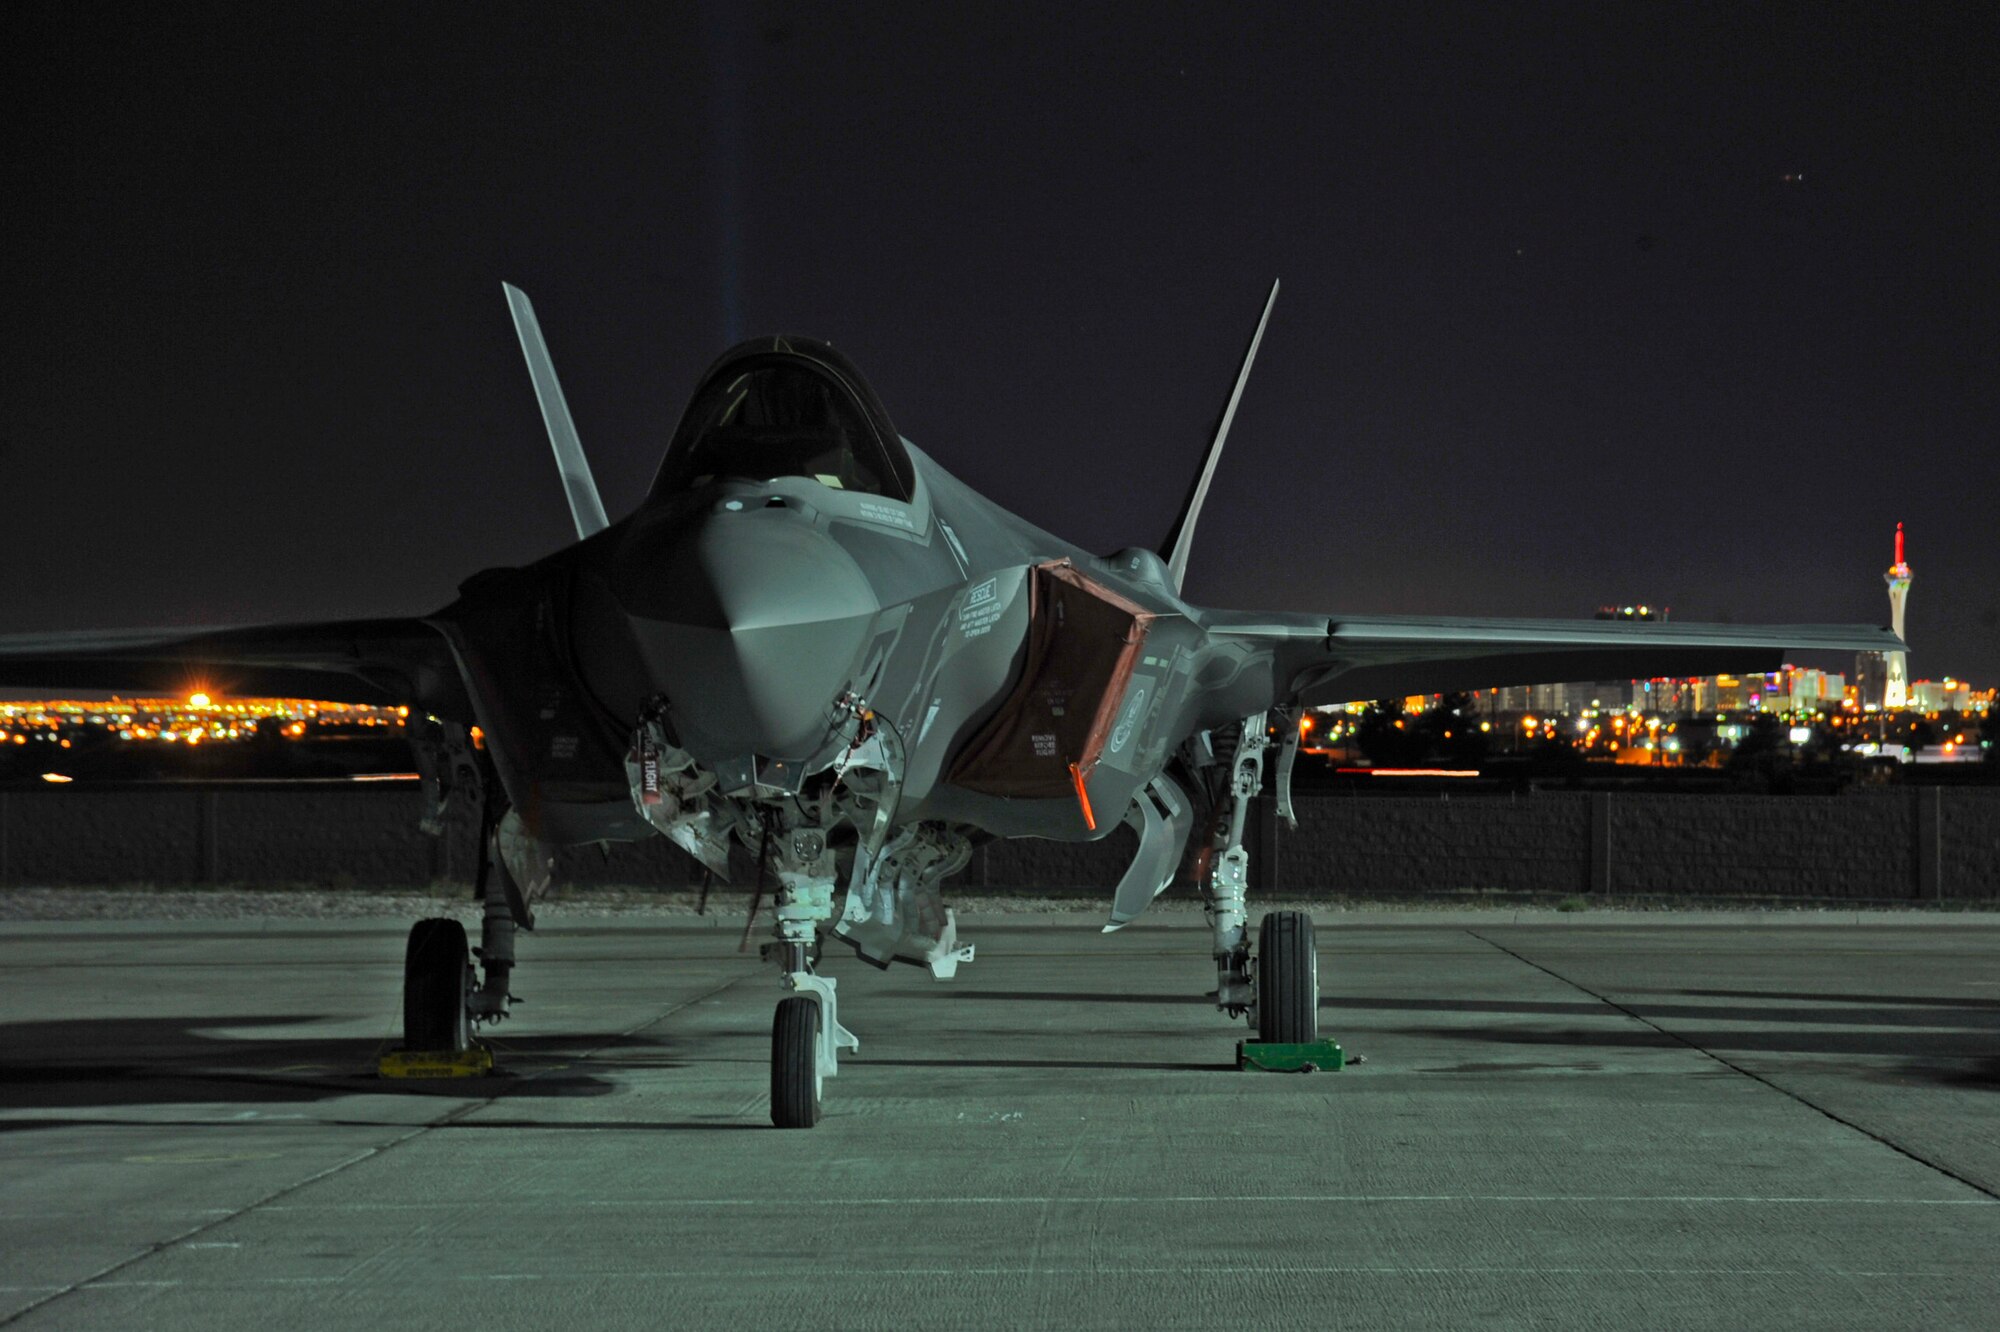 An F-35 from Luke Air Force Base rests on the Nellis AFB, Nevada, flightline April 8, 2015. The Las Vegas city lights are in the background. (U.S. Air Force photo by Staff Sgt. Darlene Seltmann)